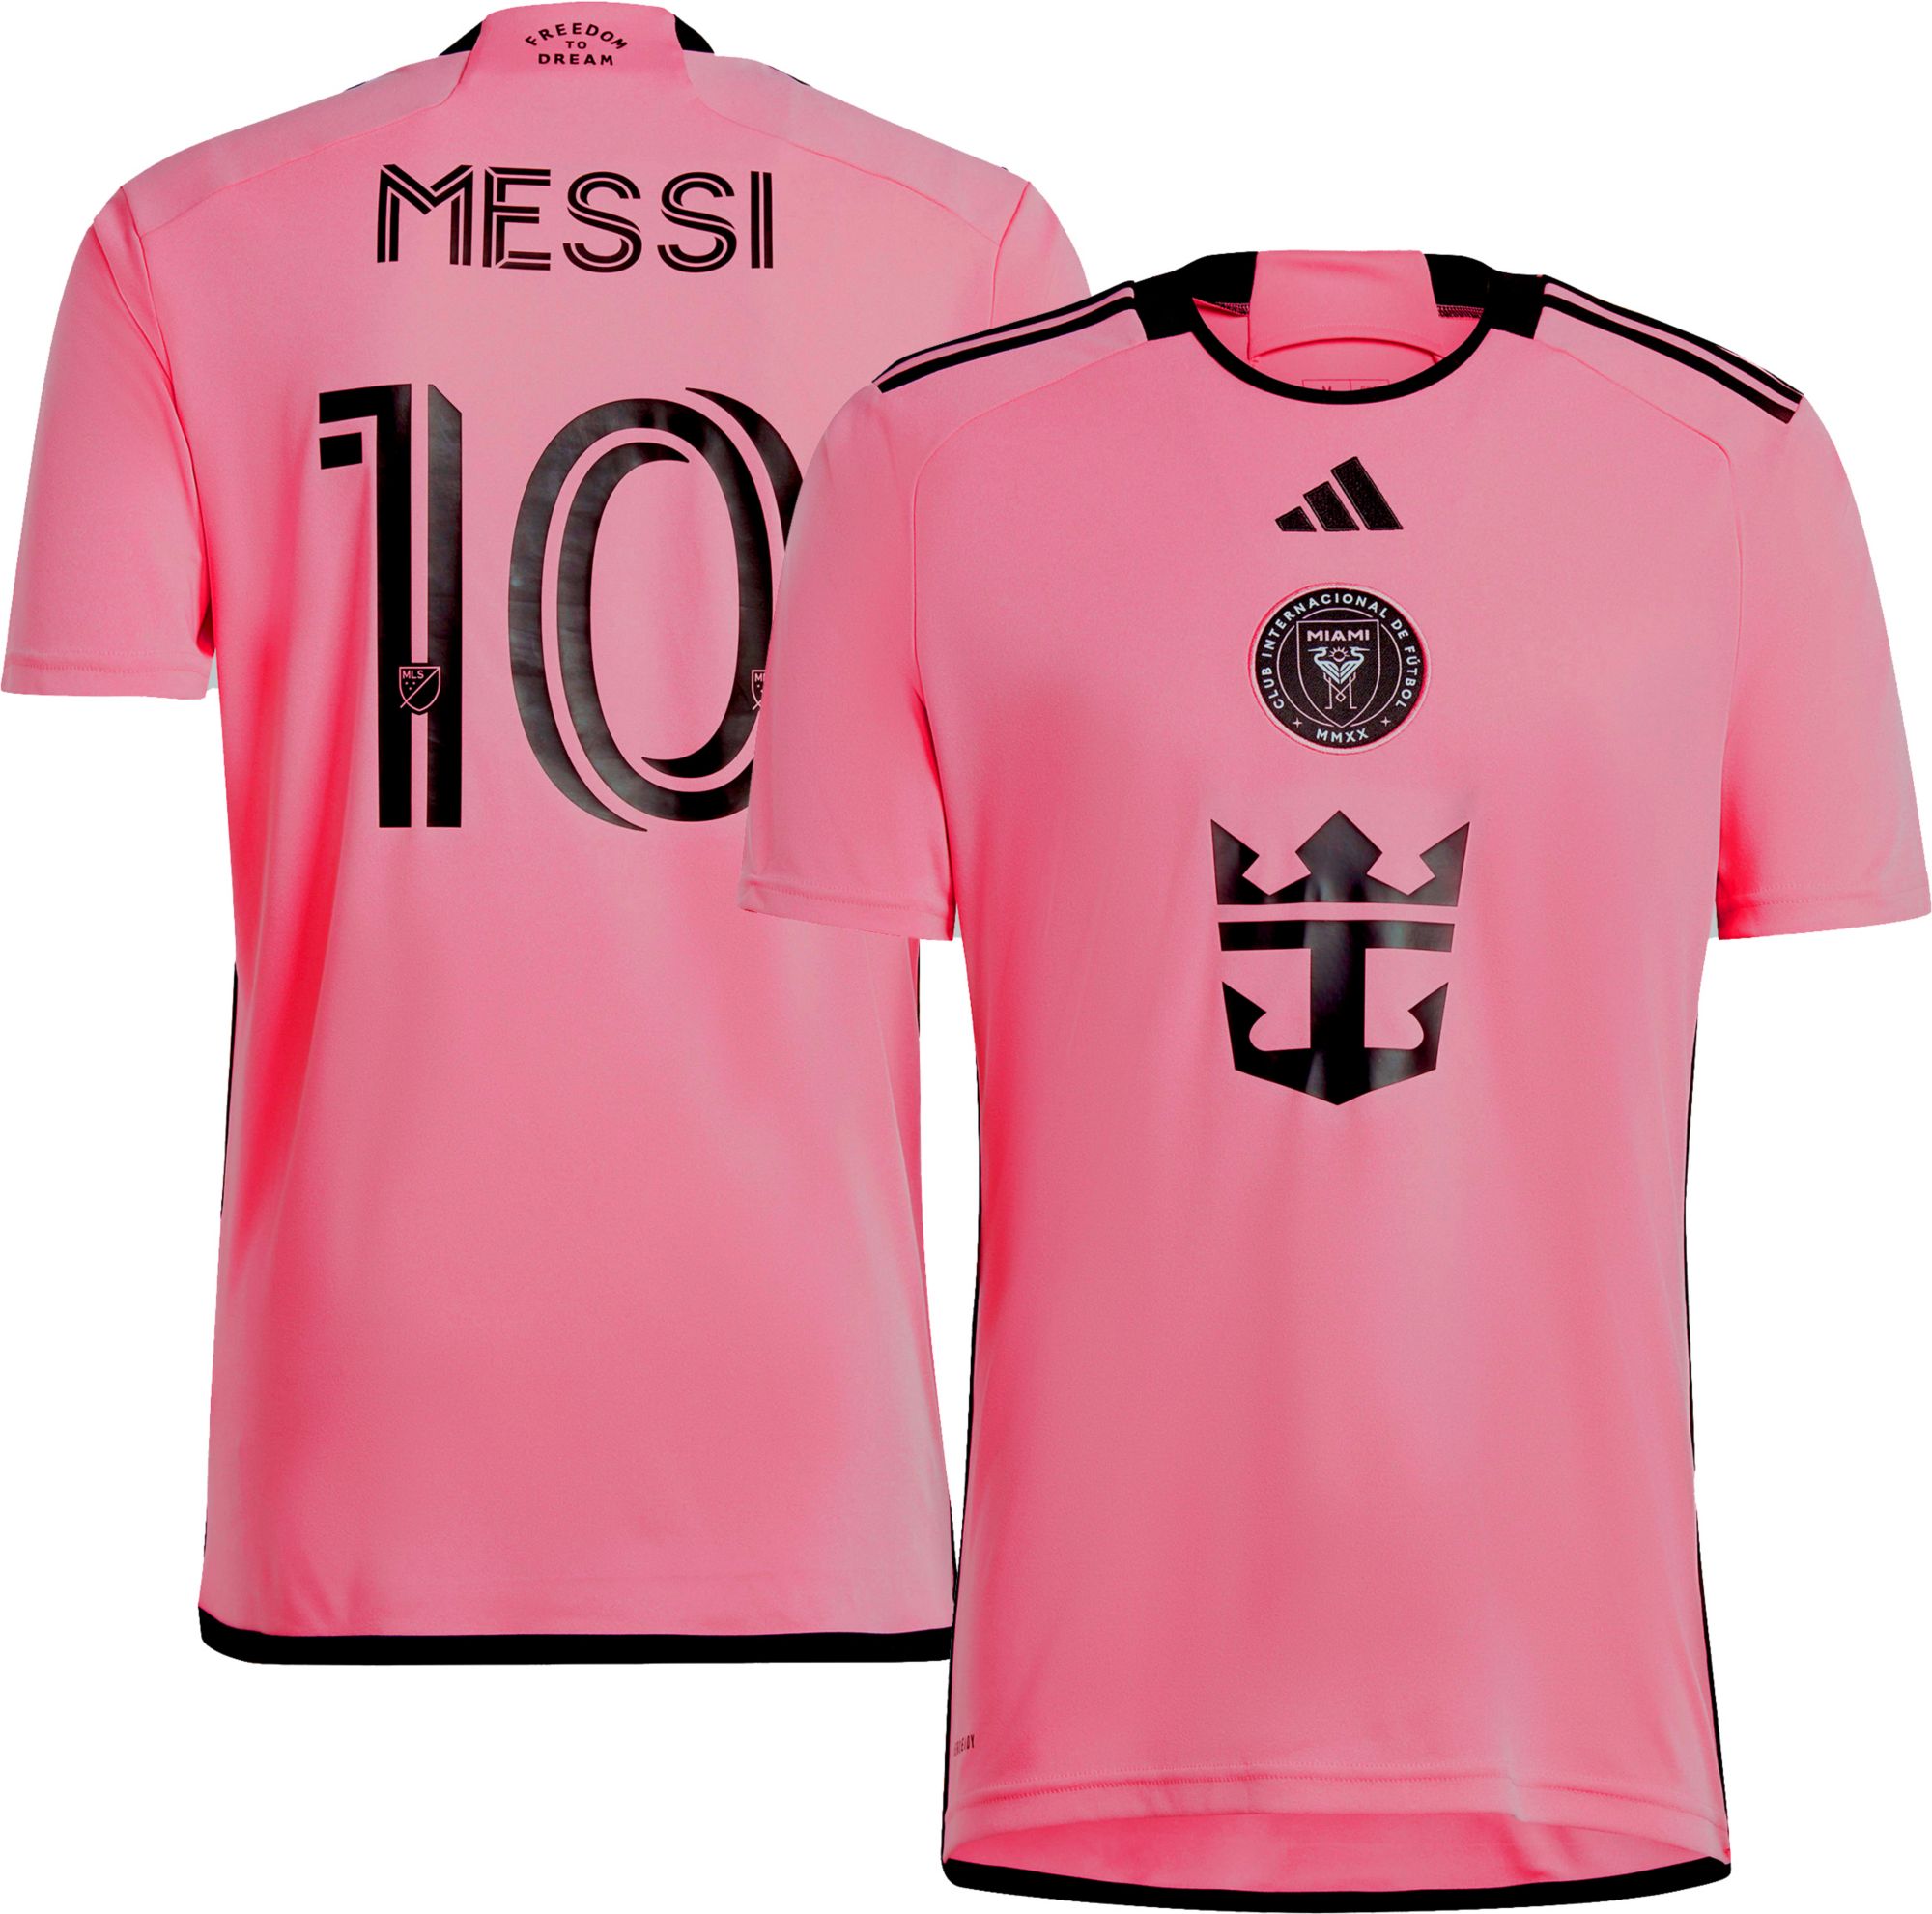 messi new jersey psg